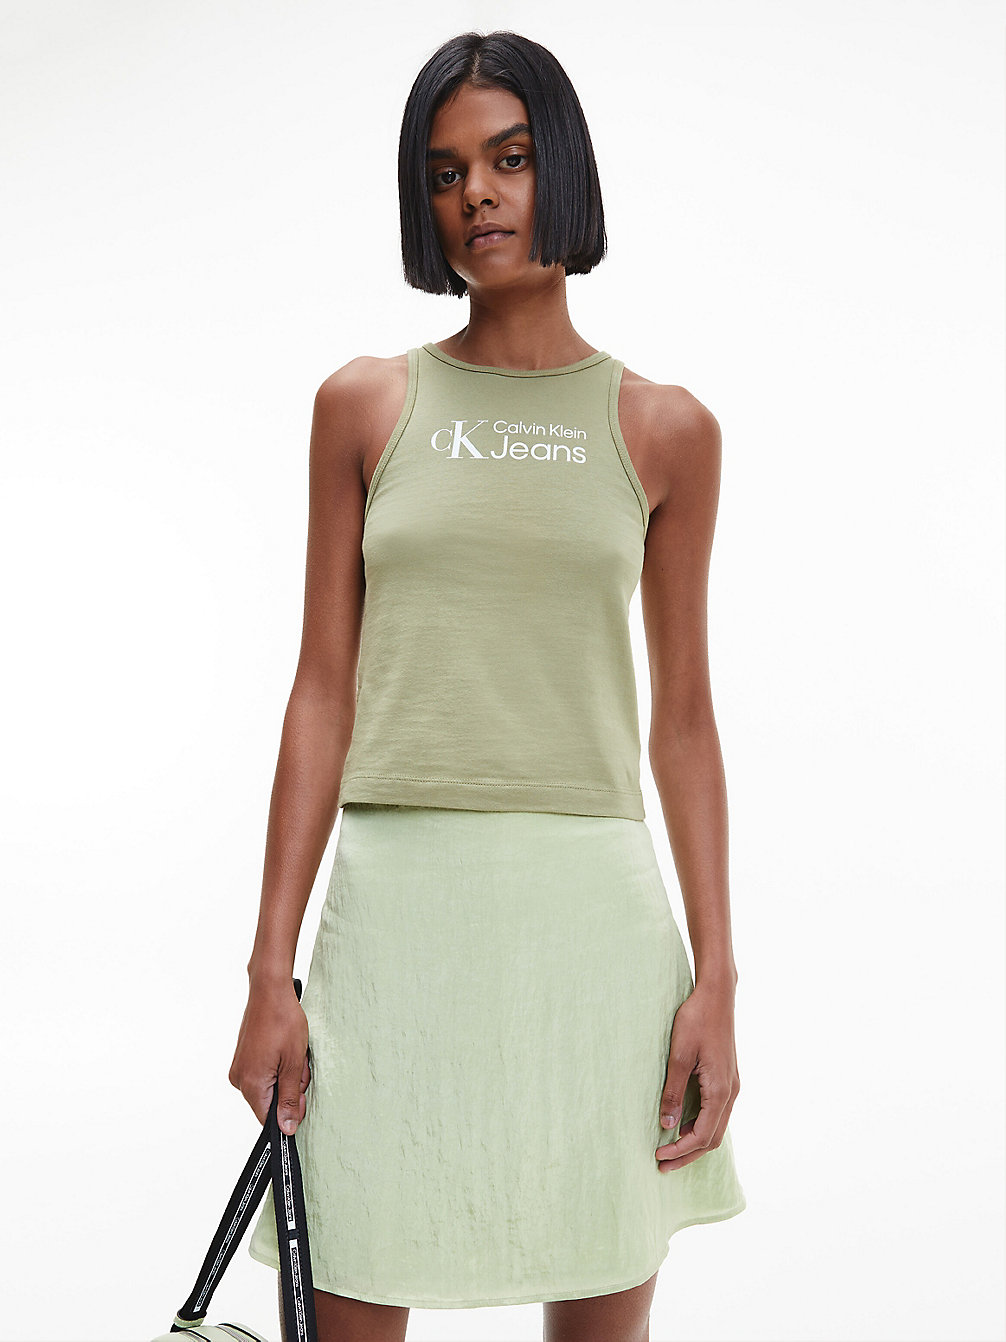 FADED OLIVE Organic Cotton Logo Tank Top undefined women Calvin Klein